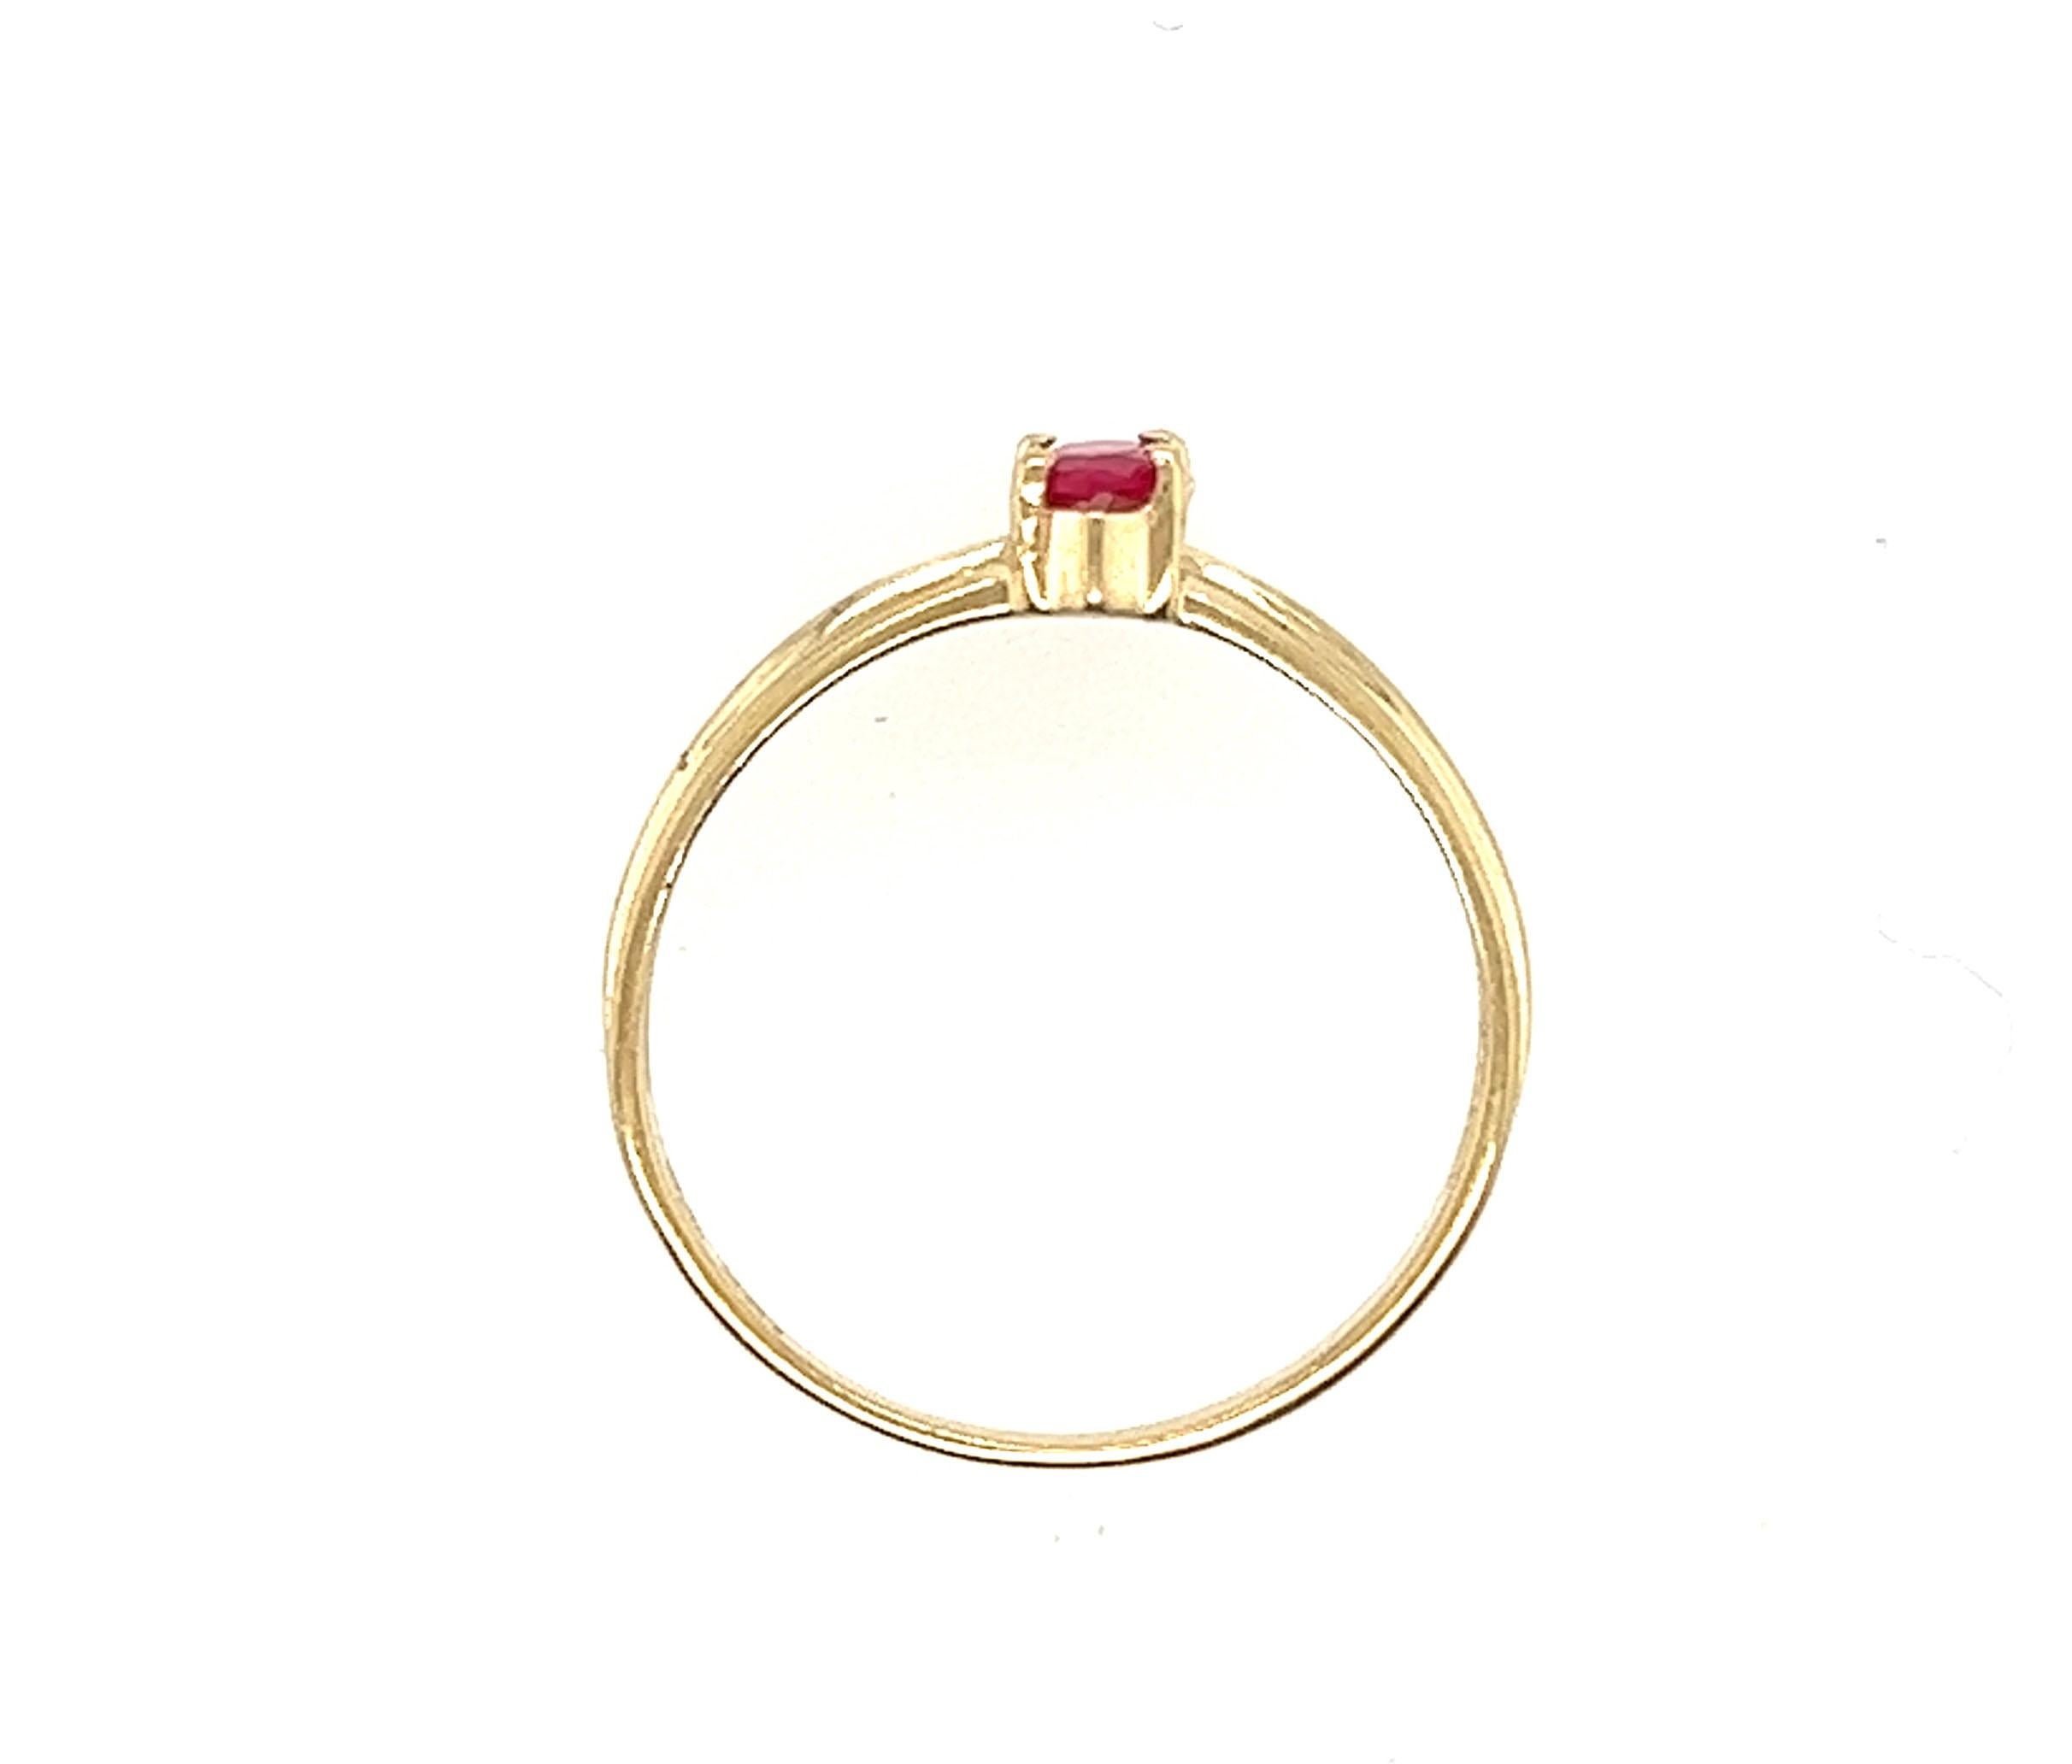 Ruby Ring .30ct Marquise Cut  10K Yellow Gold Brand New


Features a Genuine Natural .30ct Marquise Cut Ruby Gemstone Center

100% Natural Ruby Gemstone

.30 Carat Gemstone Weight

Rich Red Color Ruby

Brand New Never Worn 

Trademarked

Solid